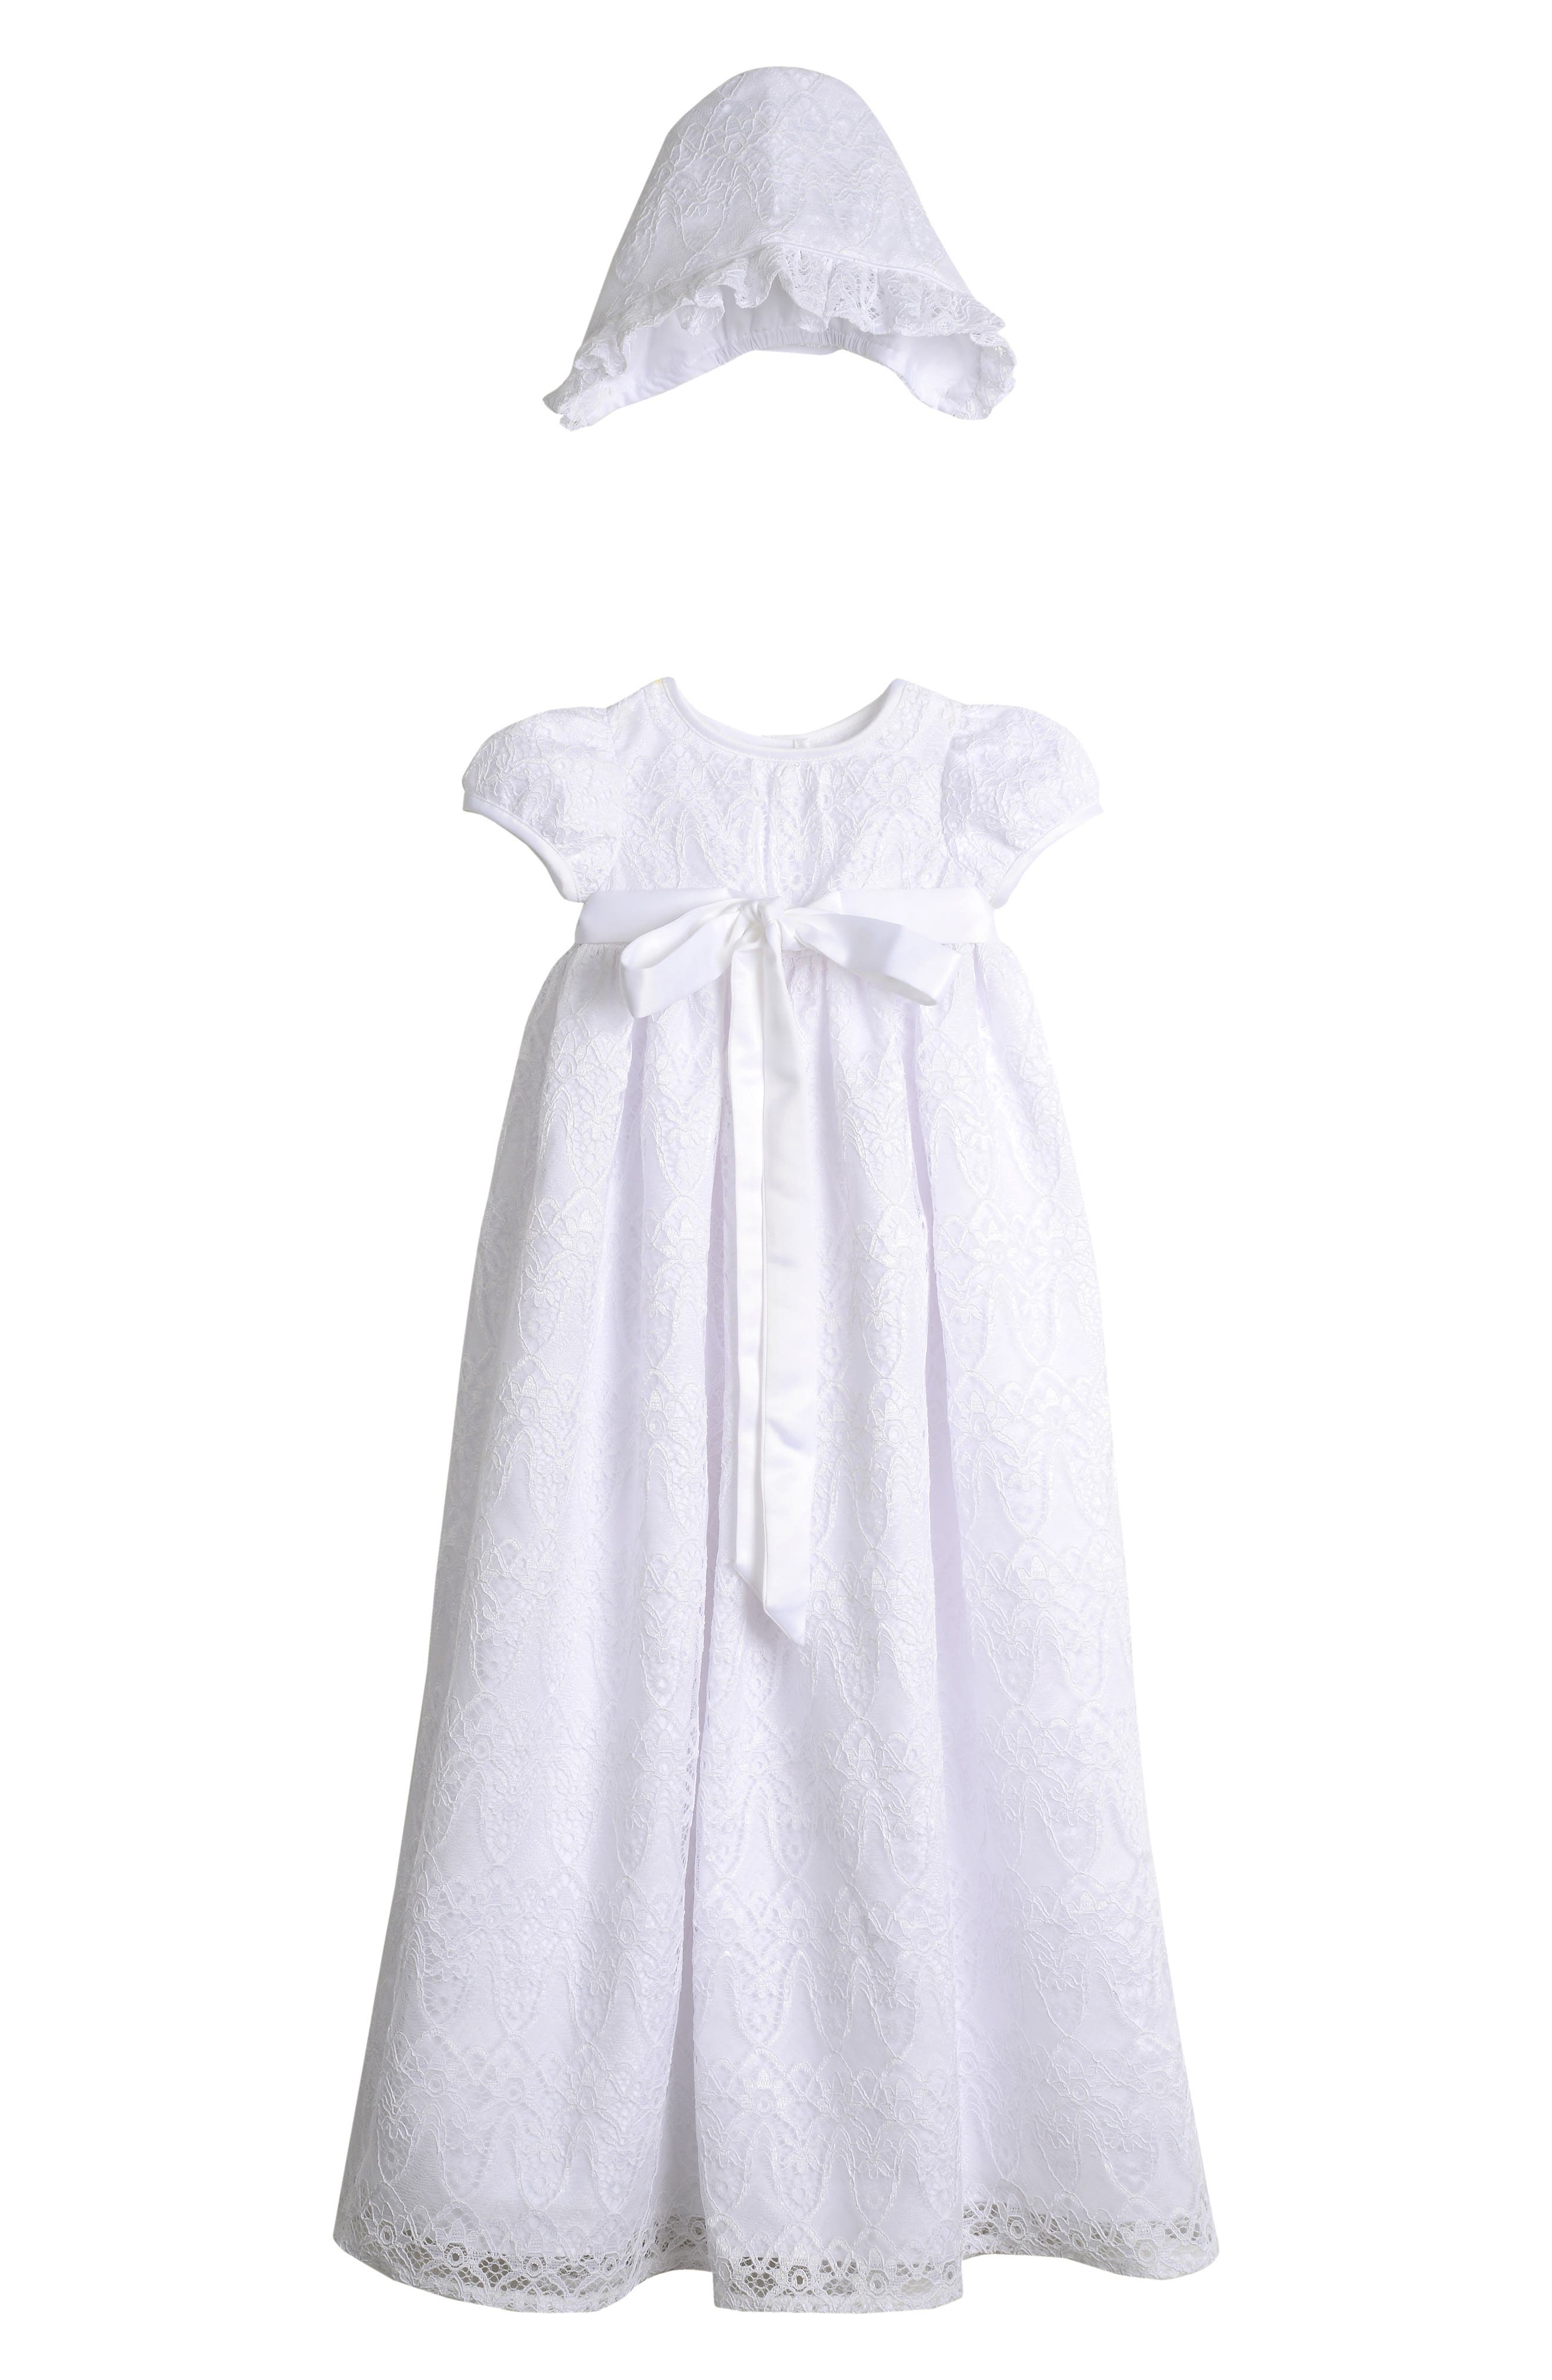 nordstrom boy christening outfits